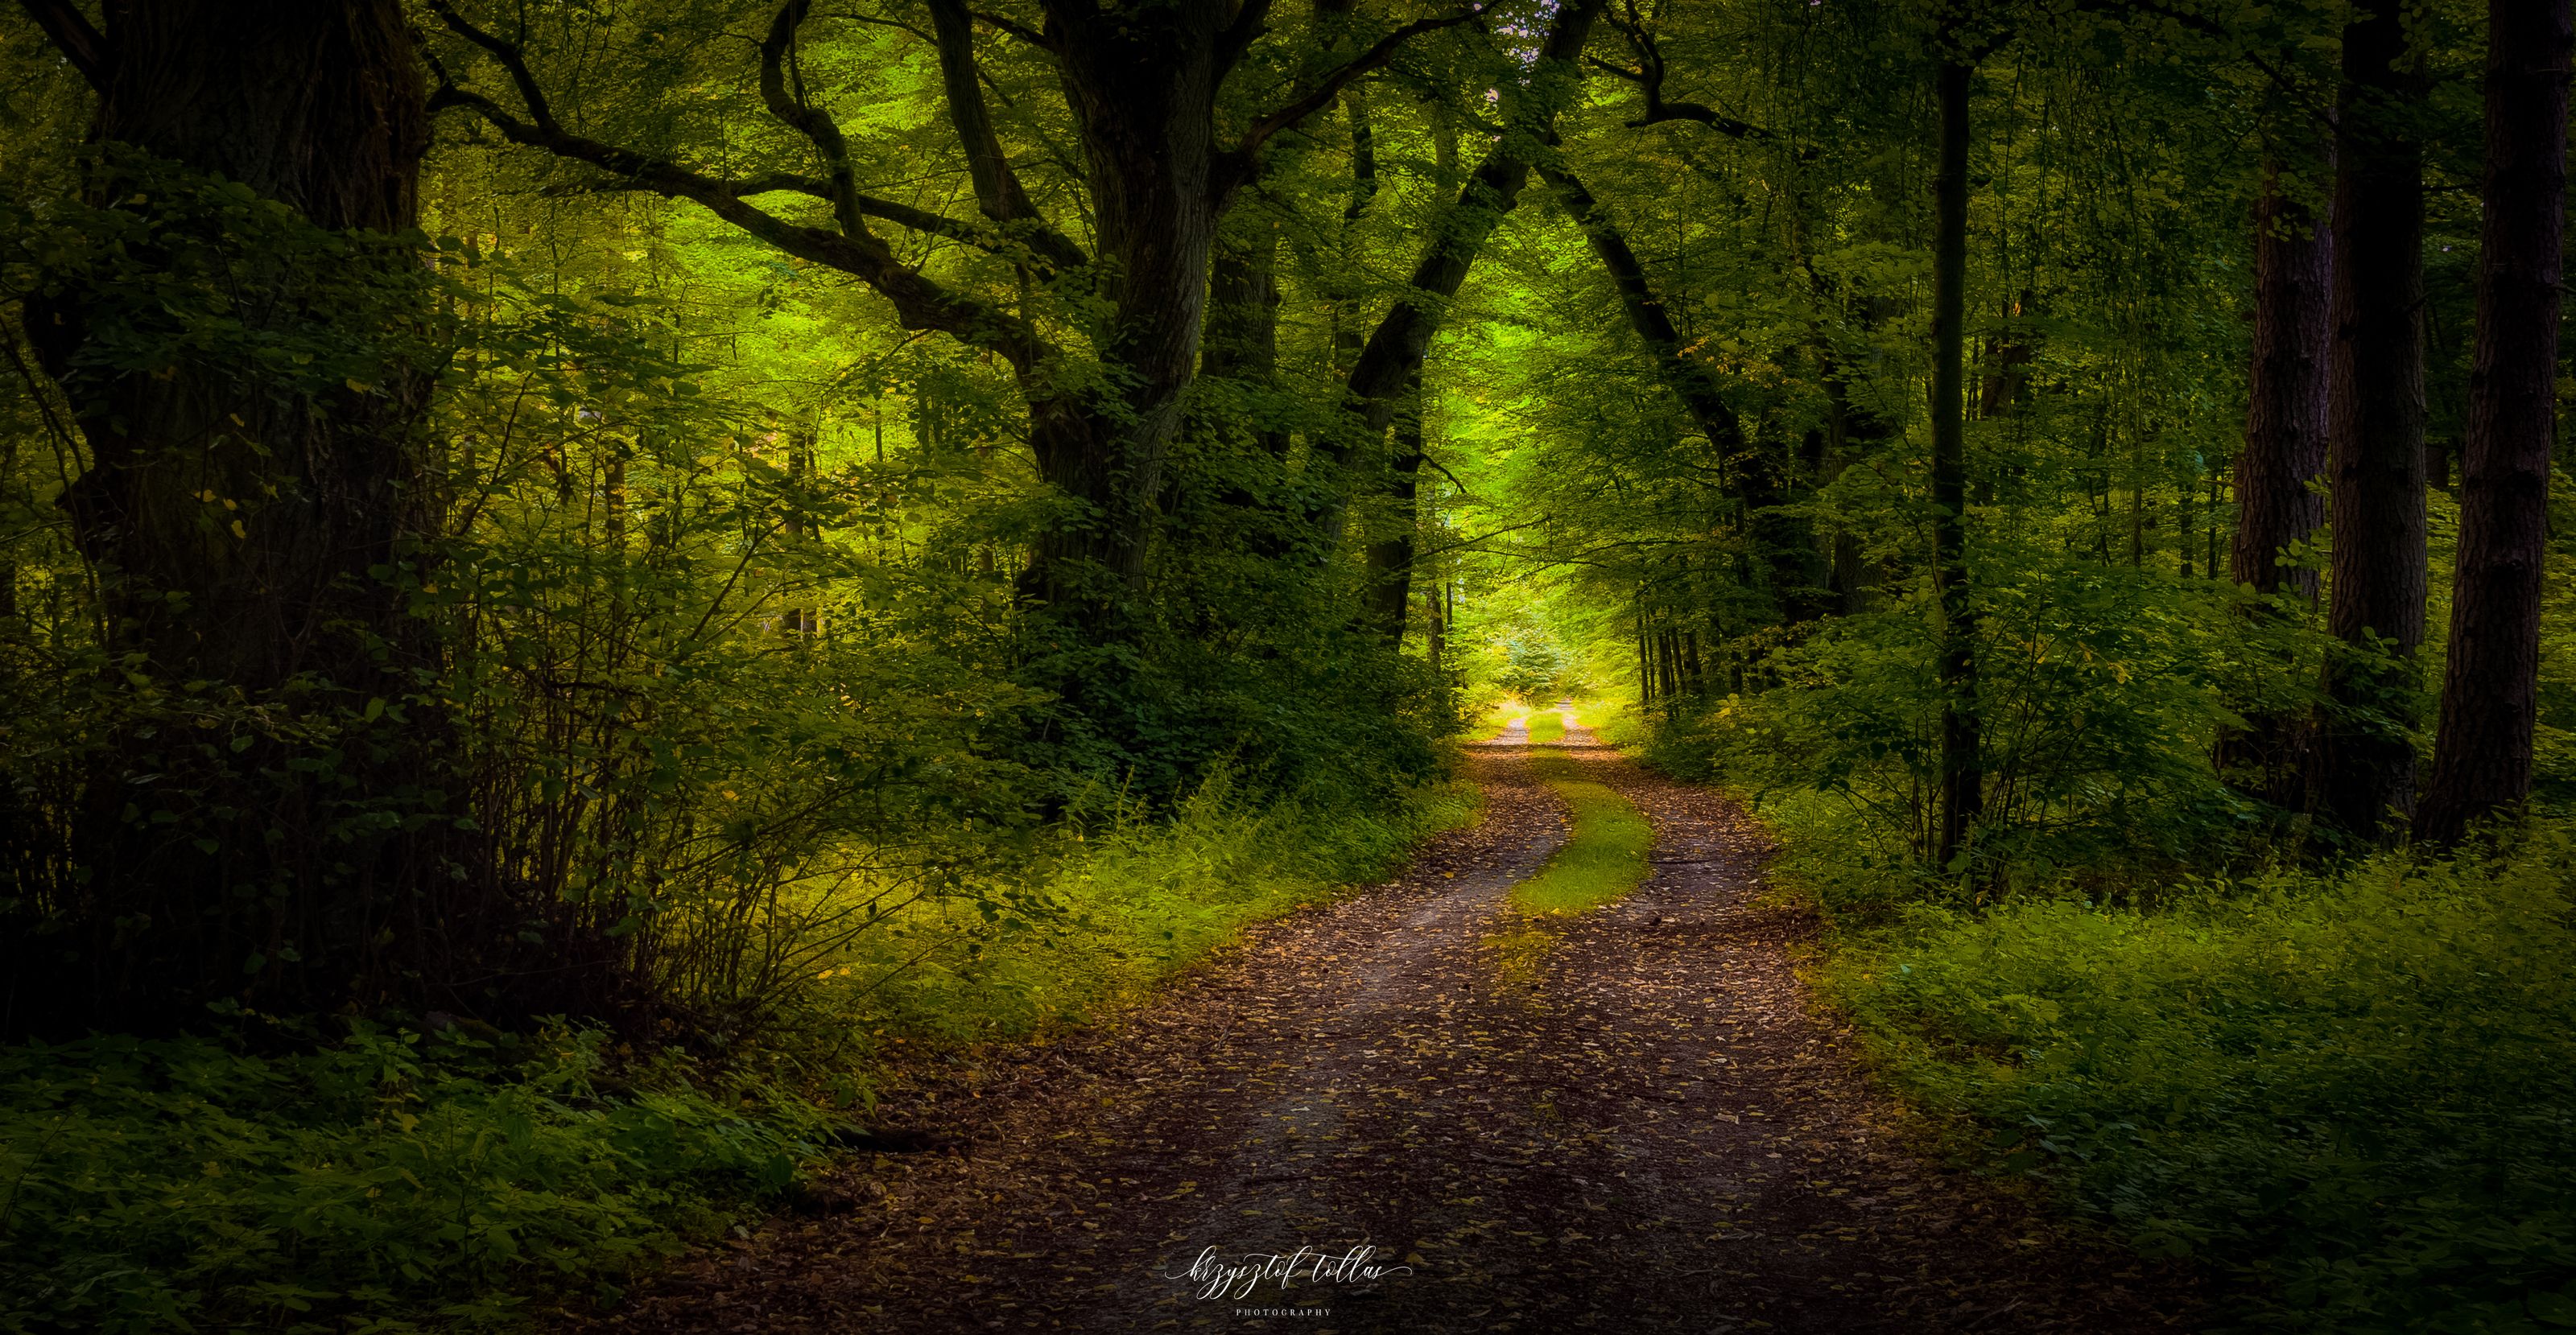 trees  forest  forest landscape  nature  light  forest road  silence  peace  nikon  daytime  forest atmosphere  Woodland  Beauty In Nature  Scenics - Nature  No People, Krzysztof Tollas